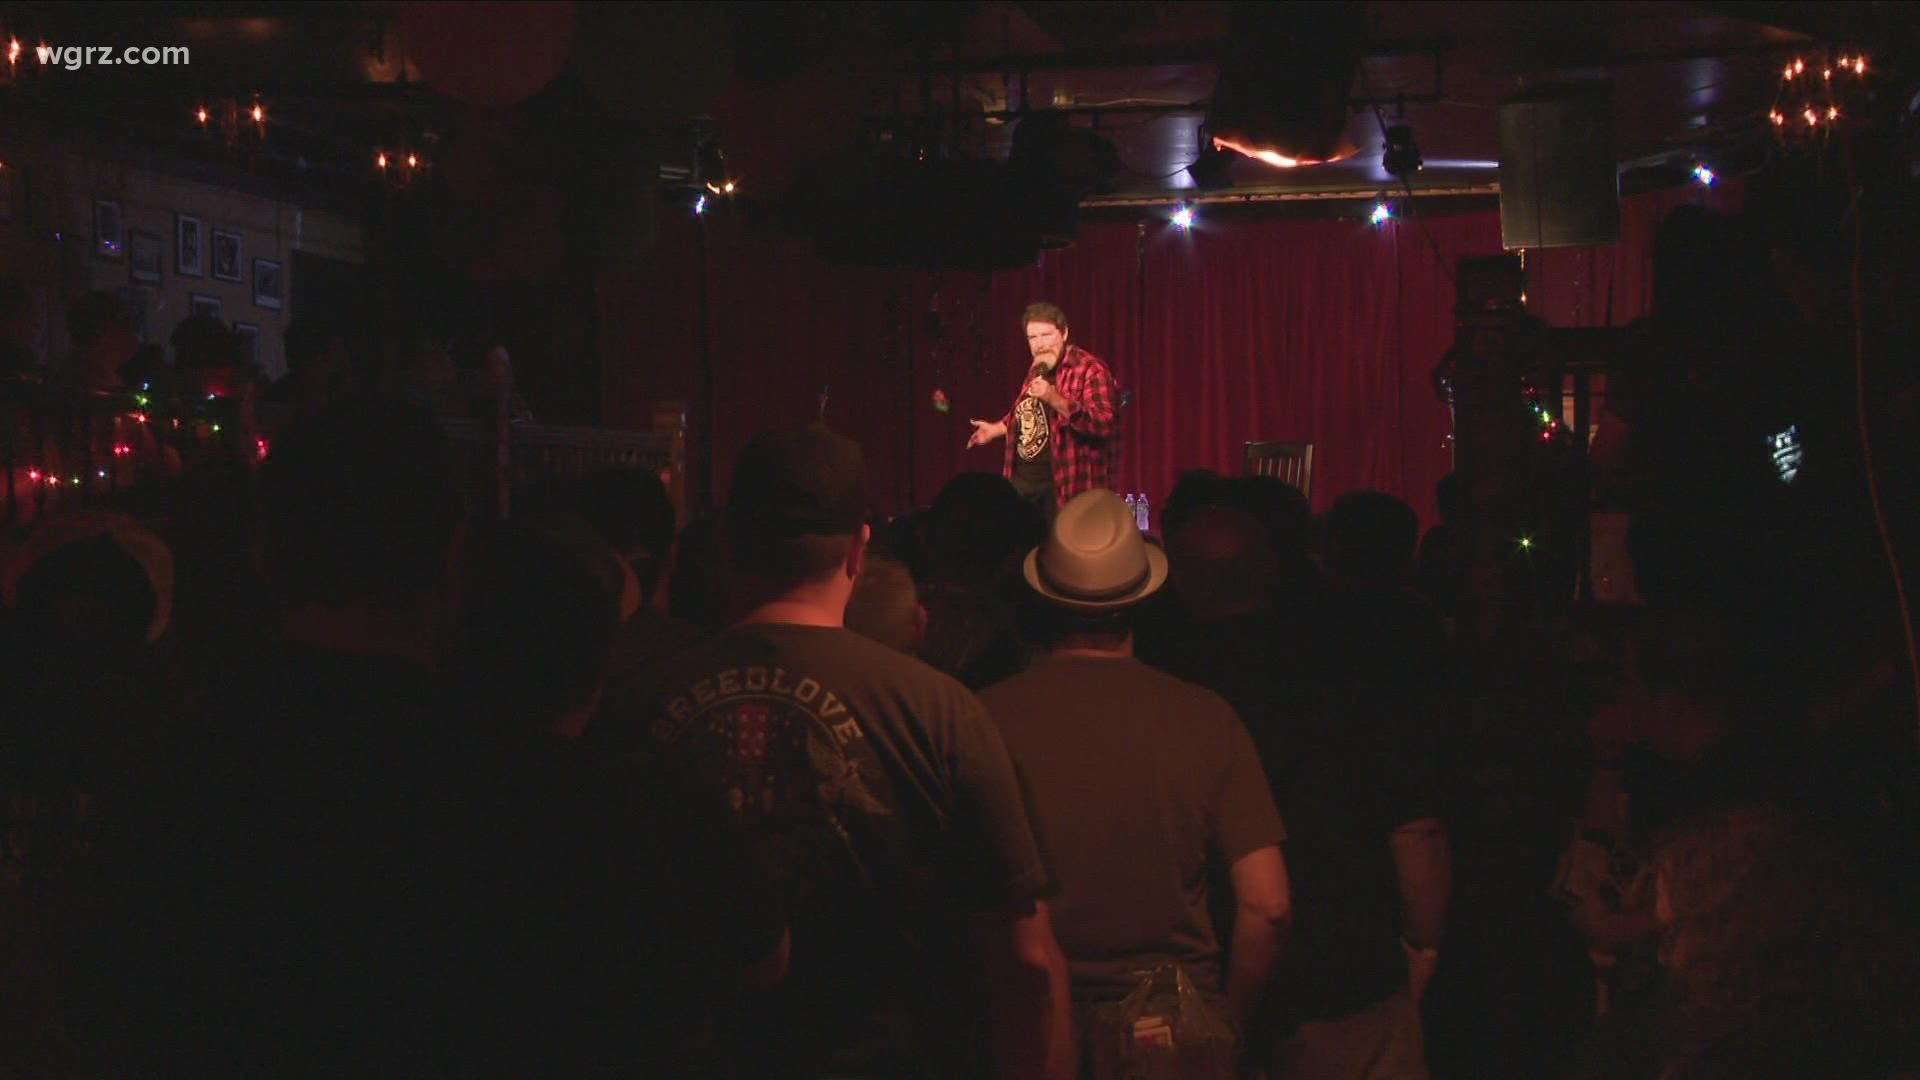 Wrestling legend Mick Foley performed stories in front of a sold out crowd at Nietzsche's on Allen Street to raise money to the 5/14 Survivors Fund.